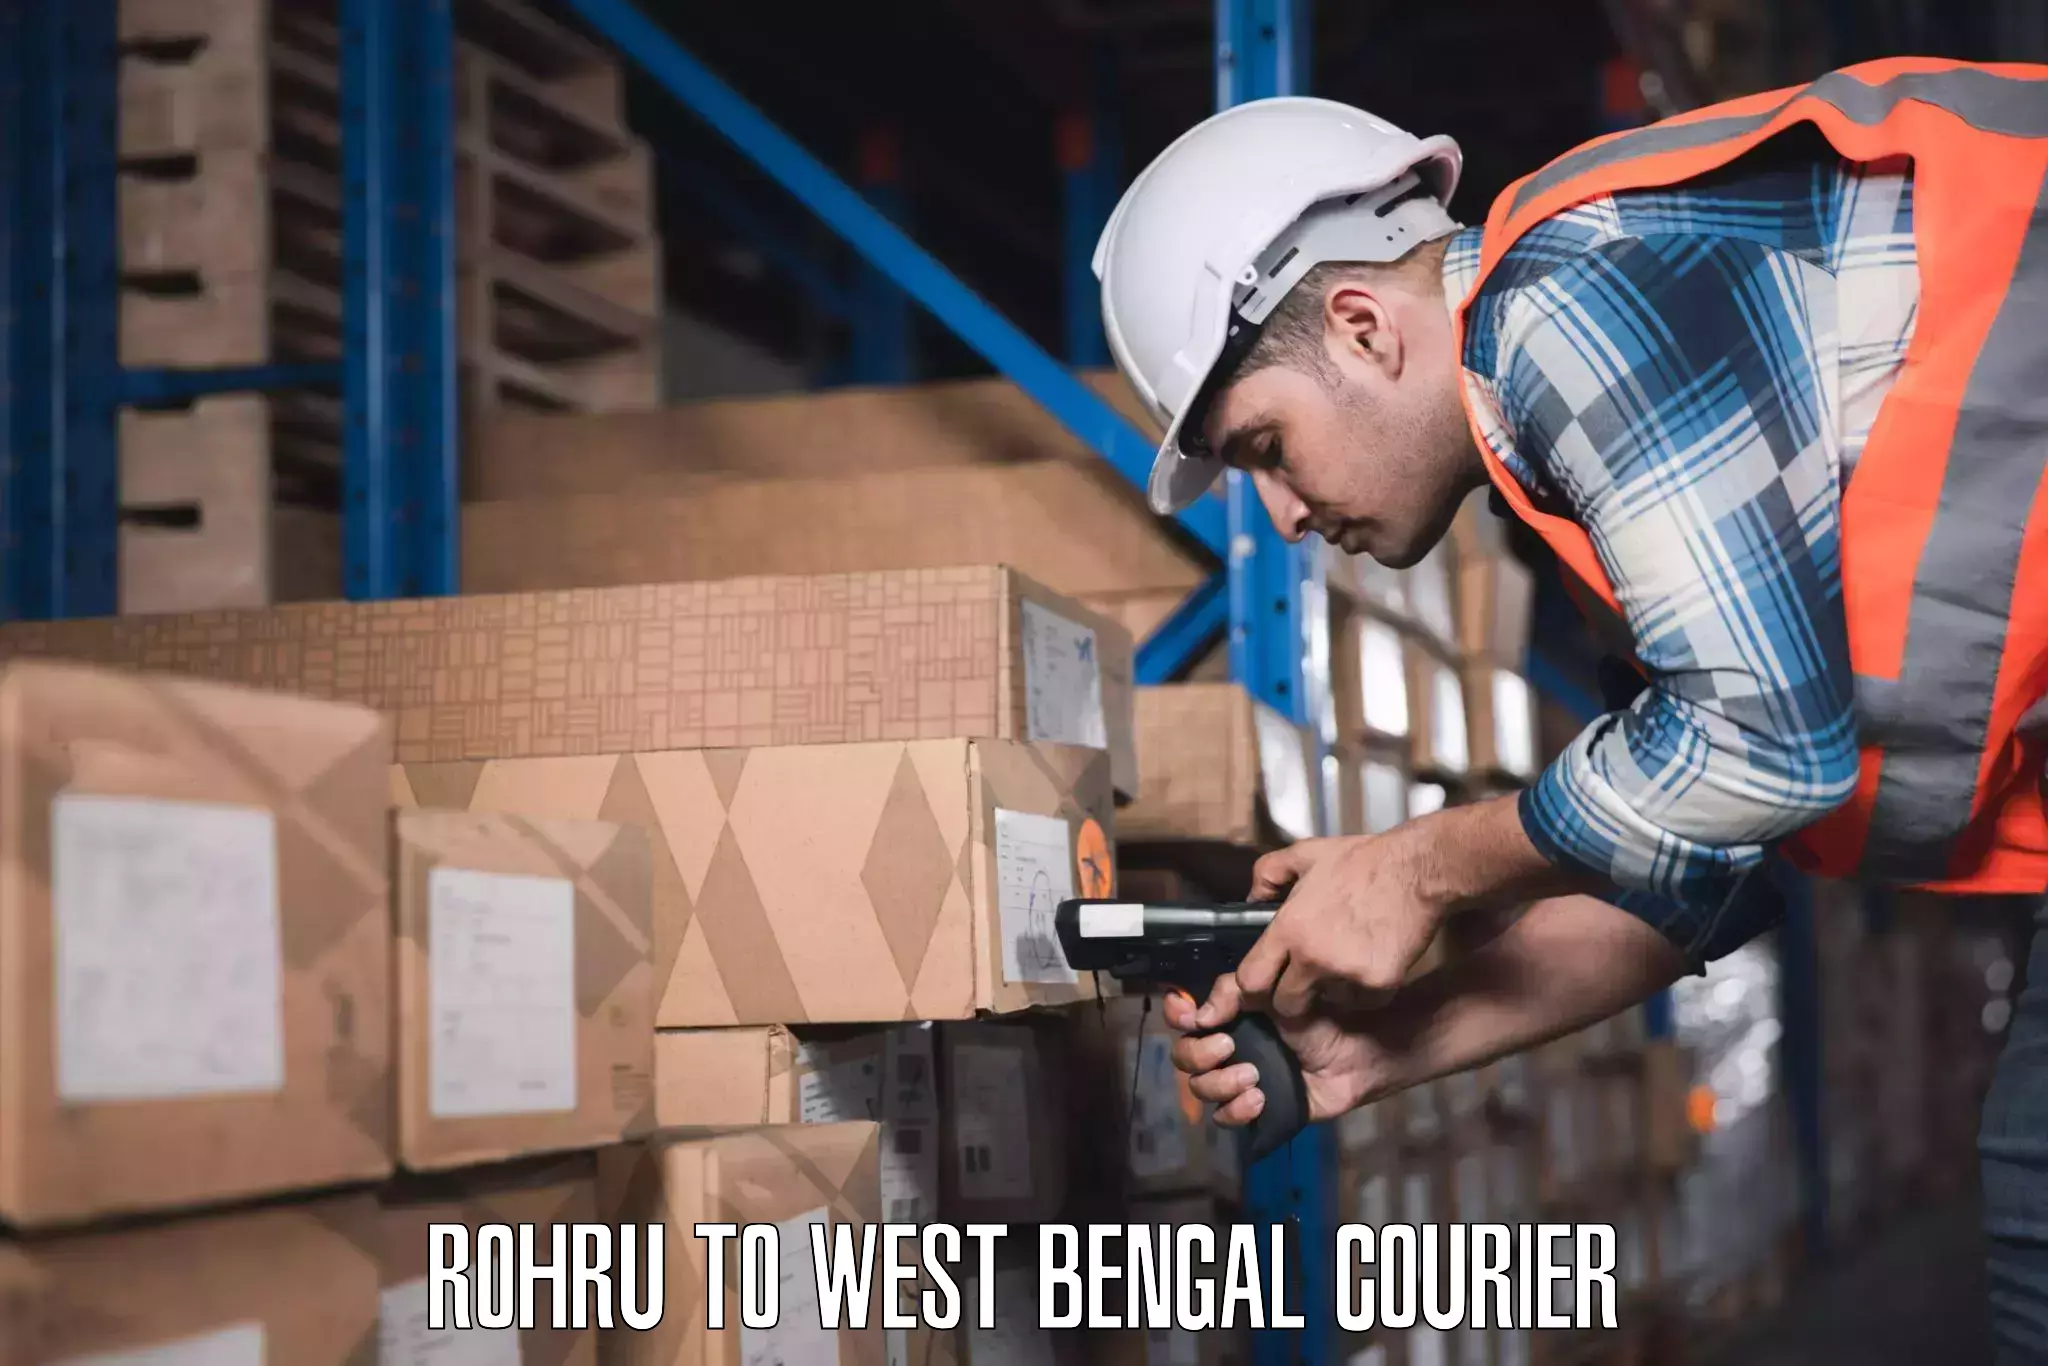 Luggage transfer service Rohru to West Bengal